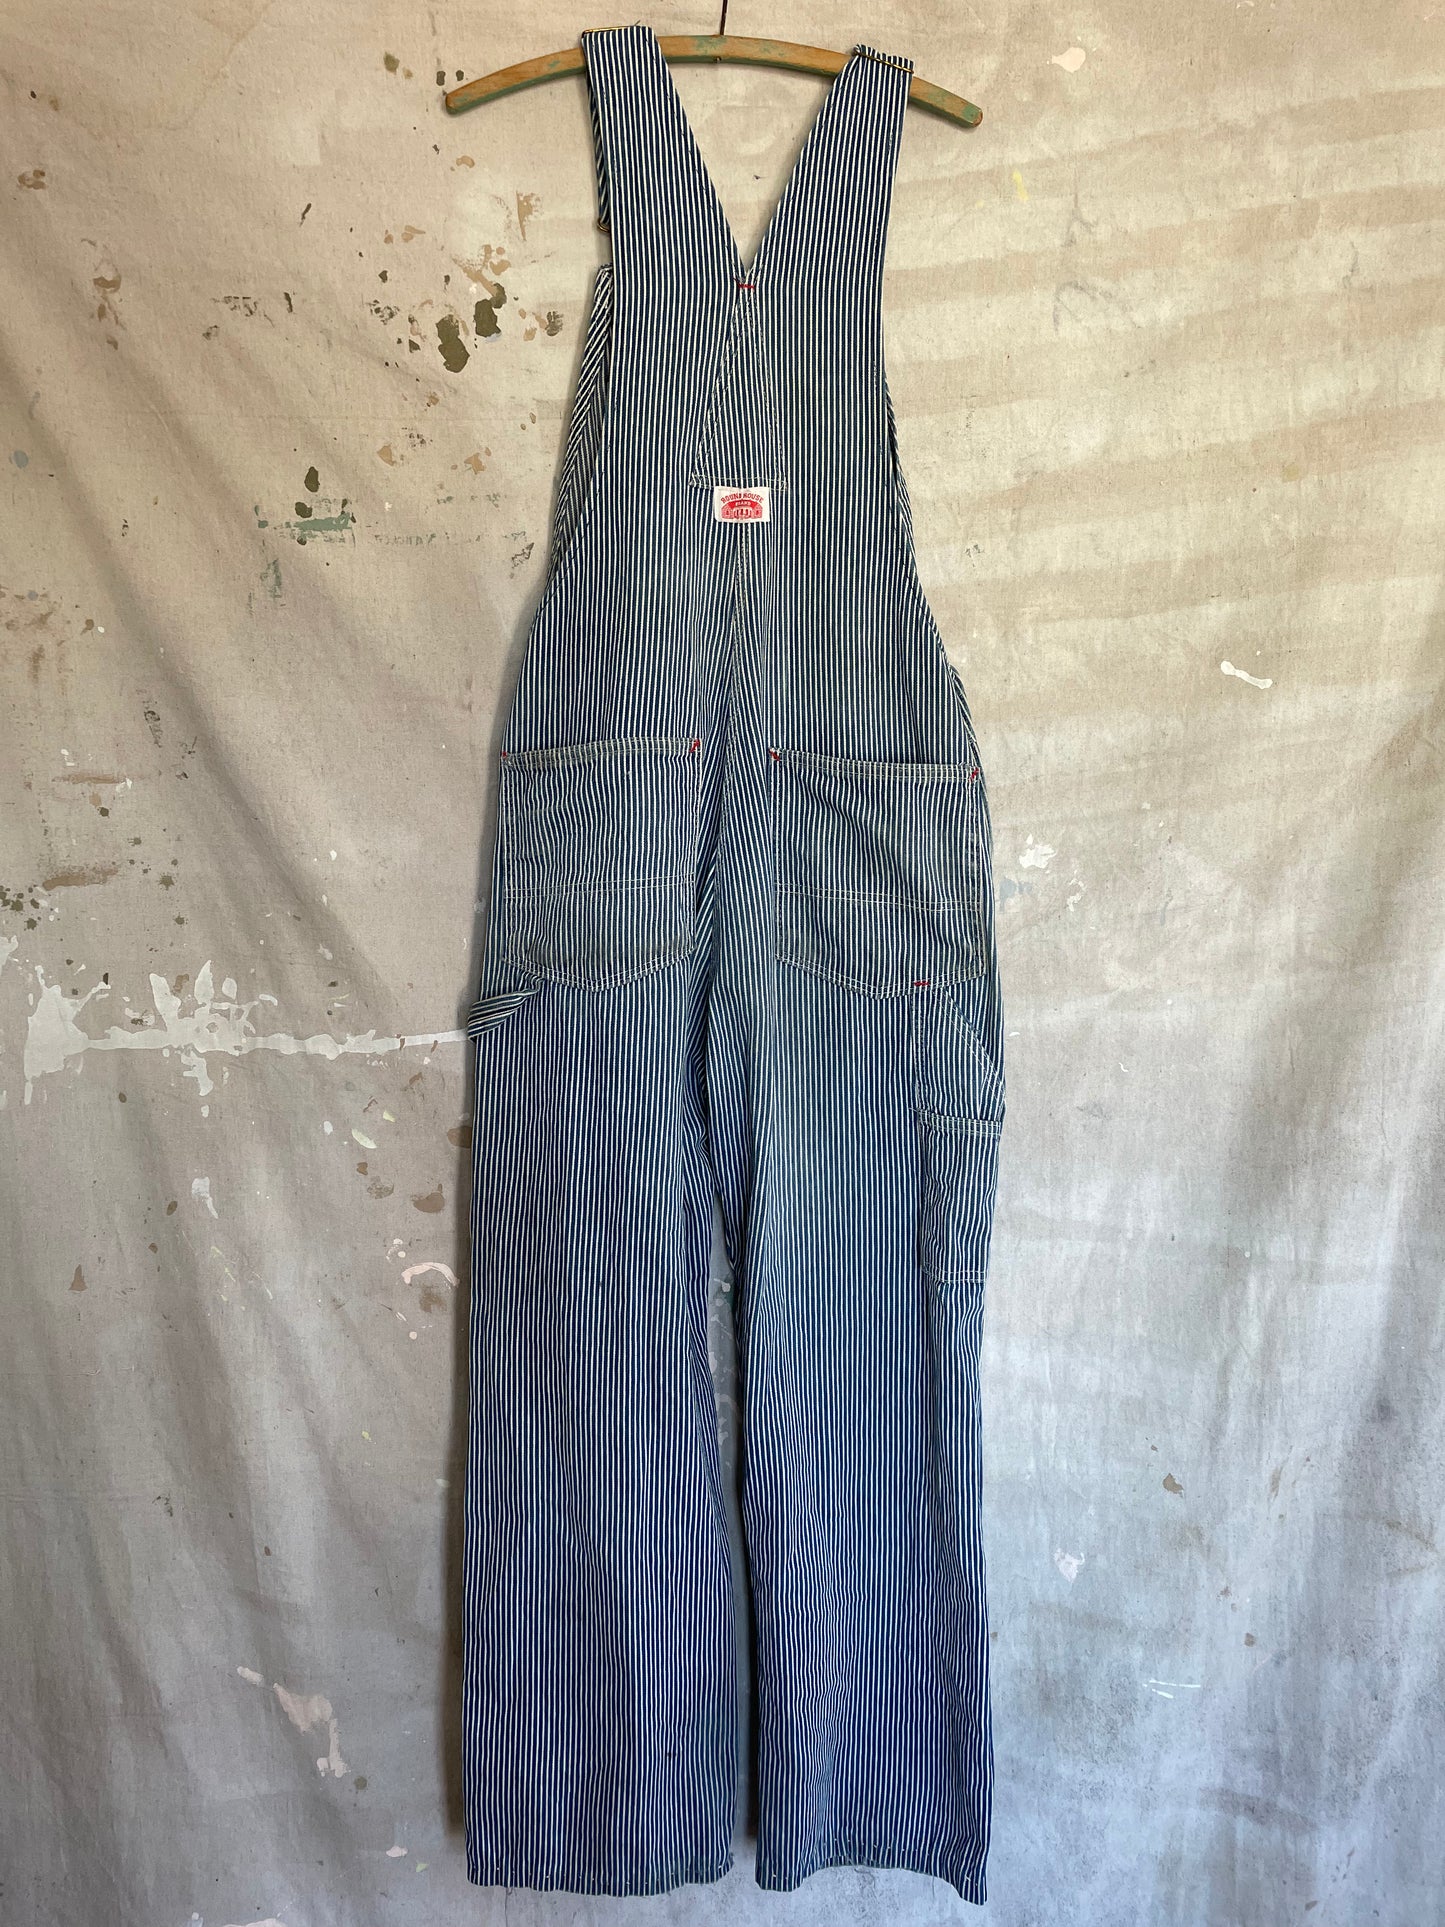 80s Roundhouse Hickory Stripe Overalls